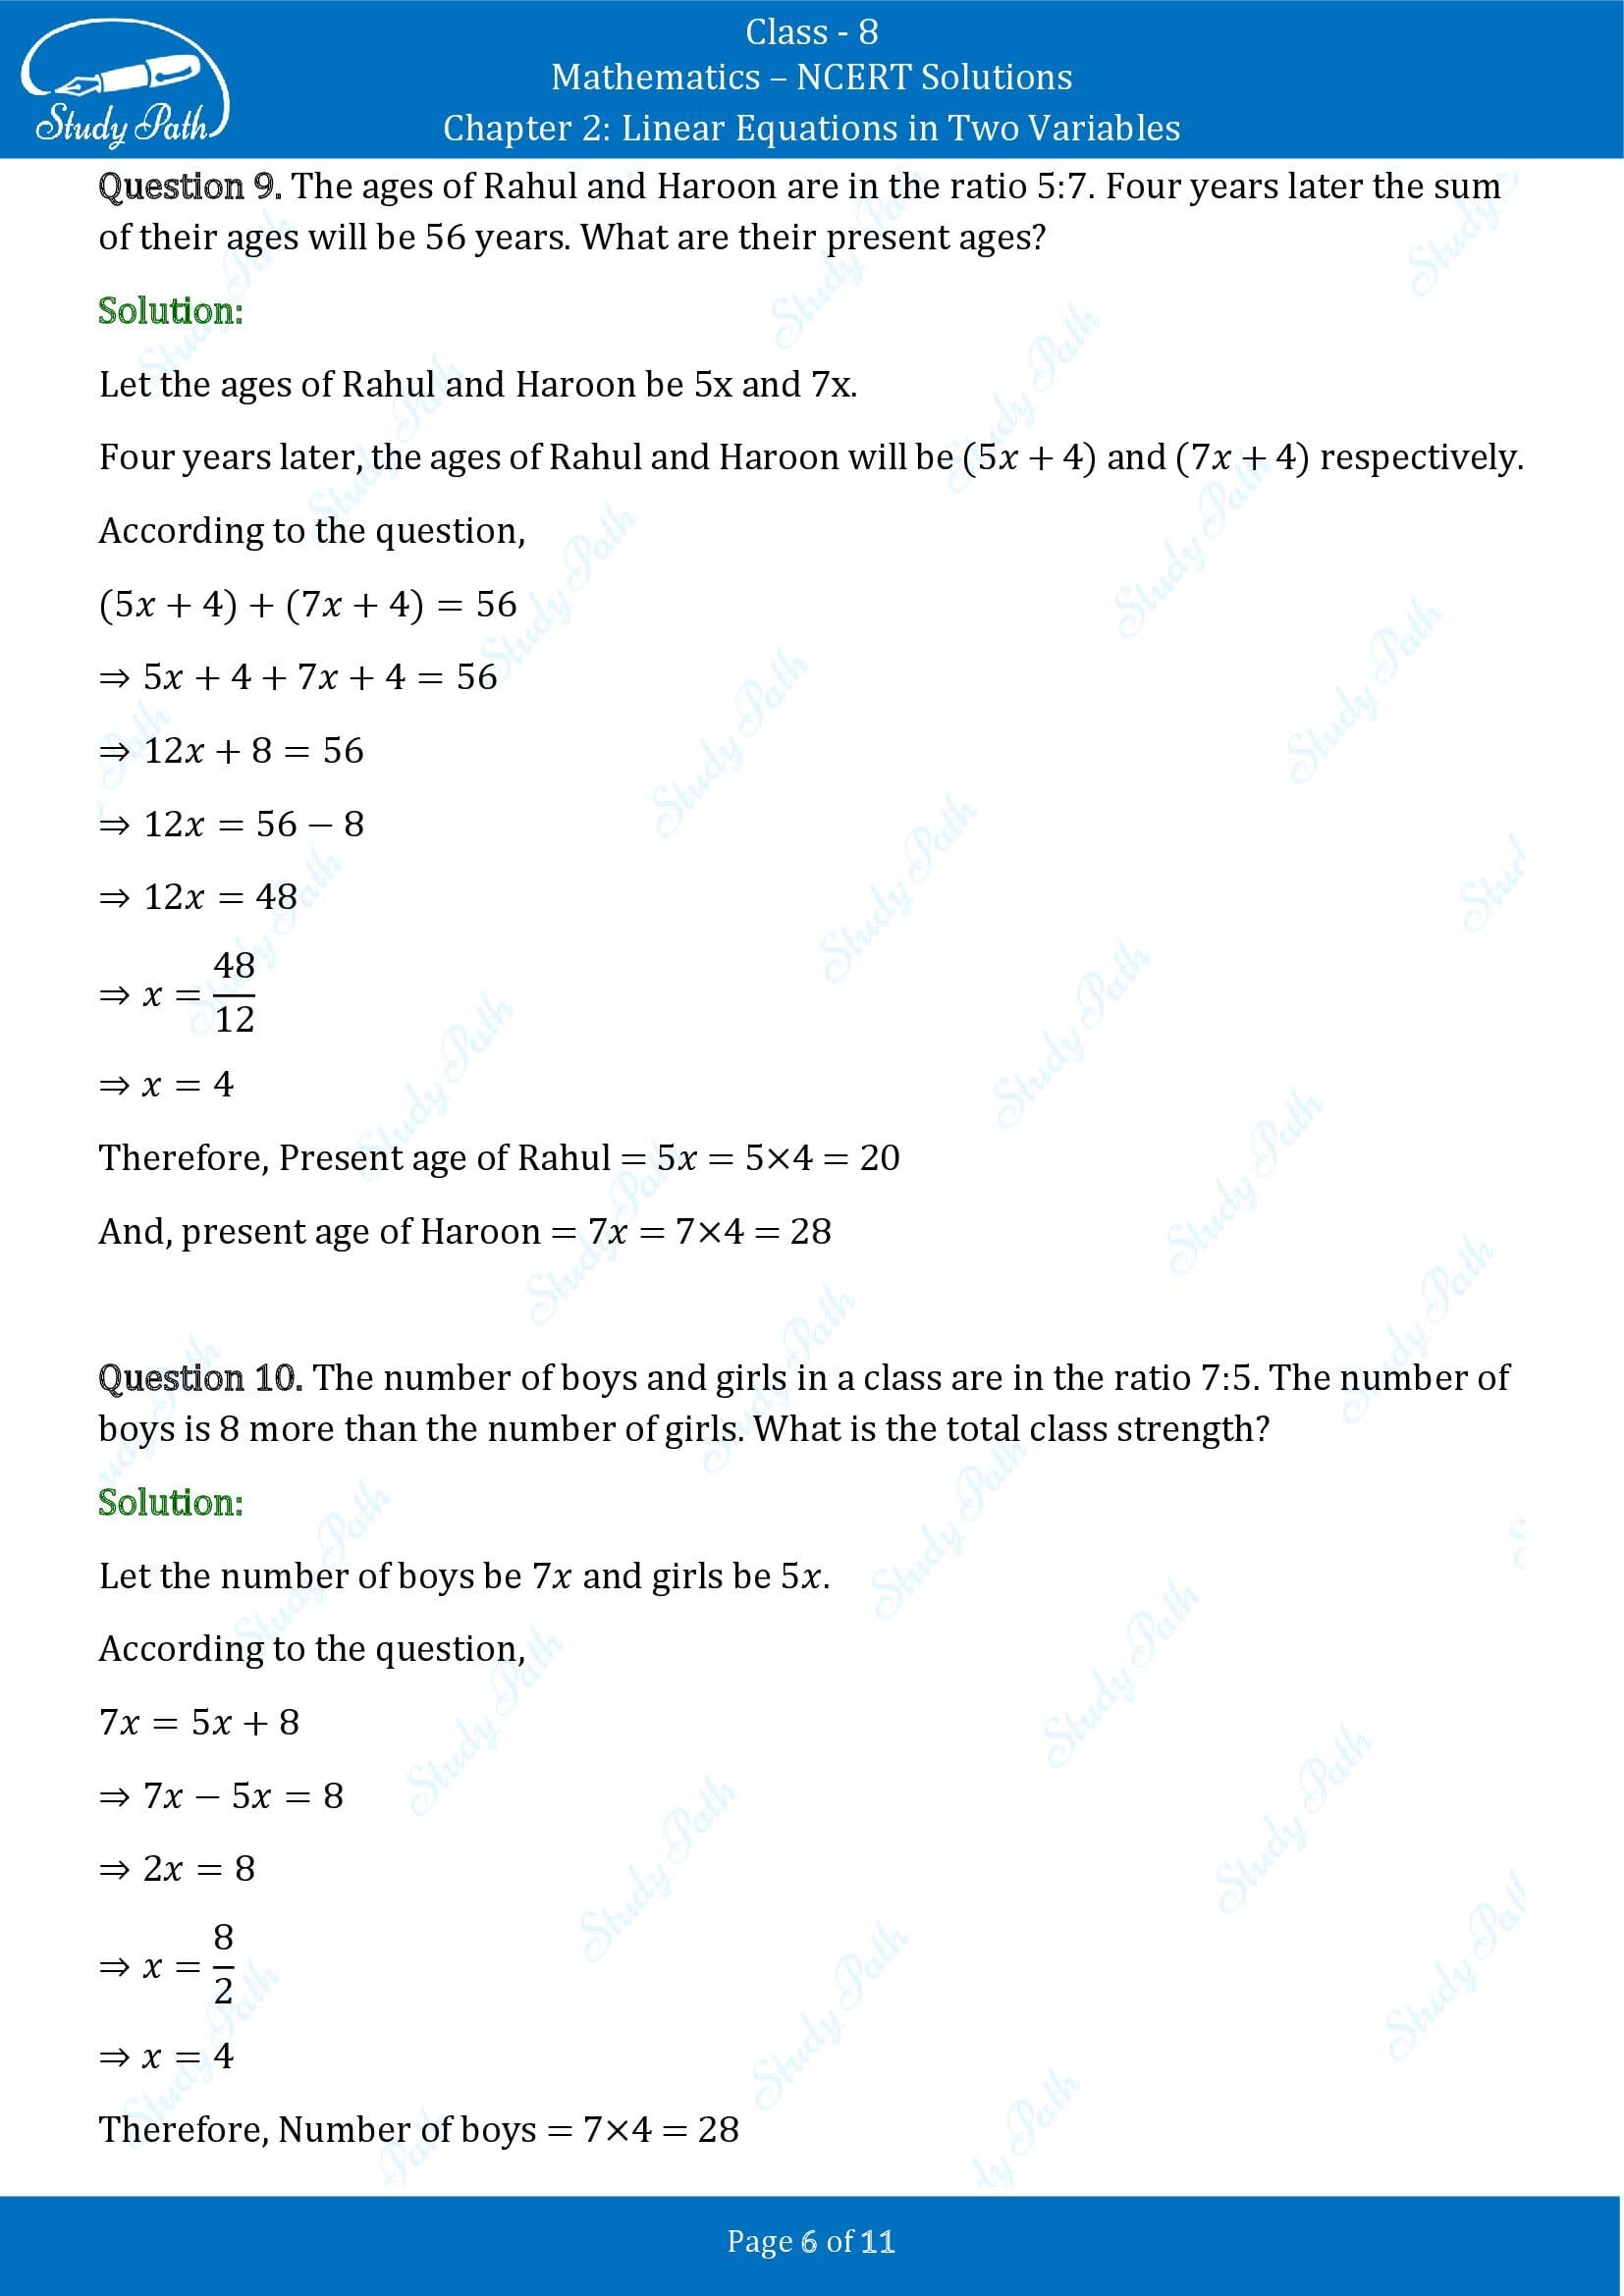 NCERT Solutions for Class 8 Maths Chapter 2 Linear Equations in Two Variables Exercise 2.2 00006